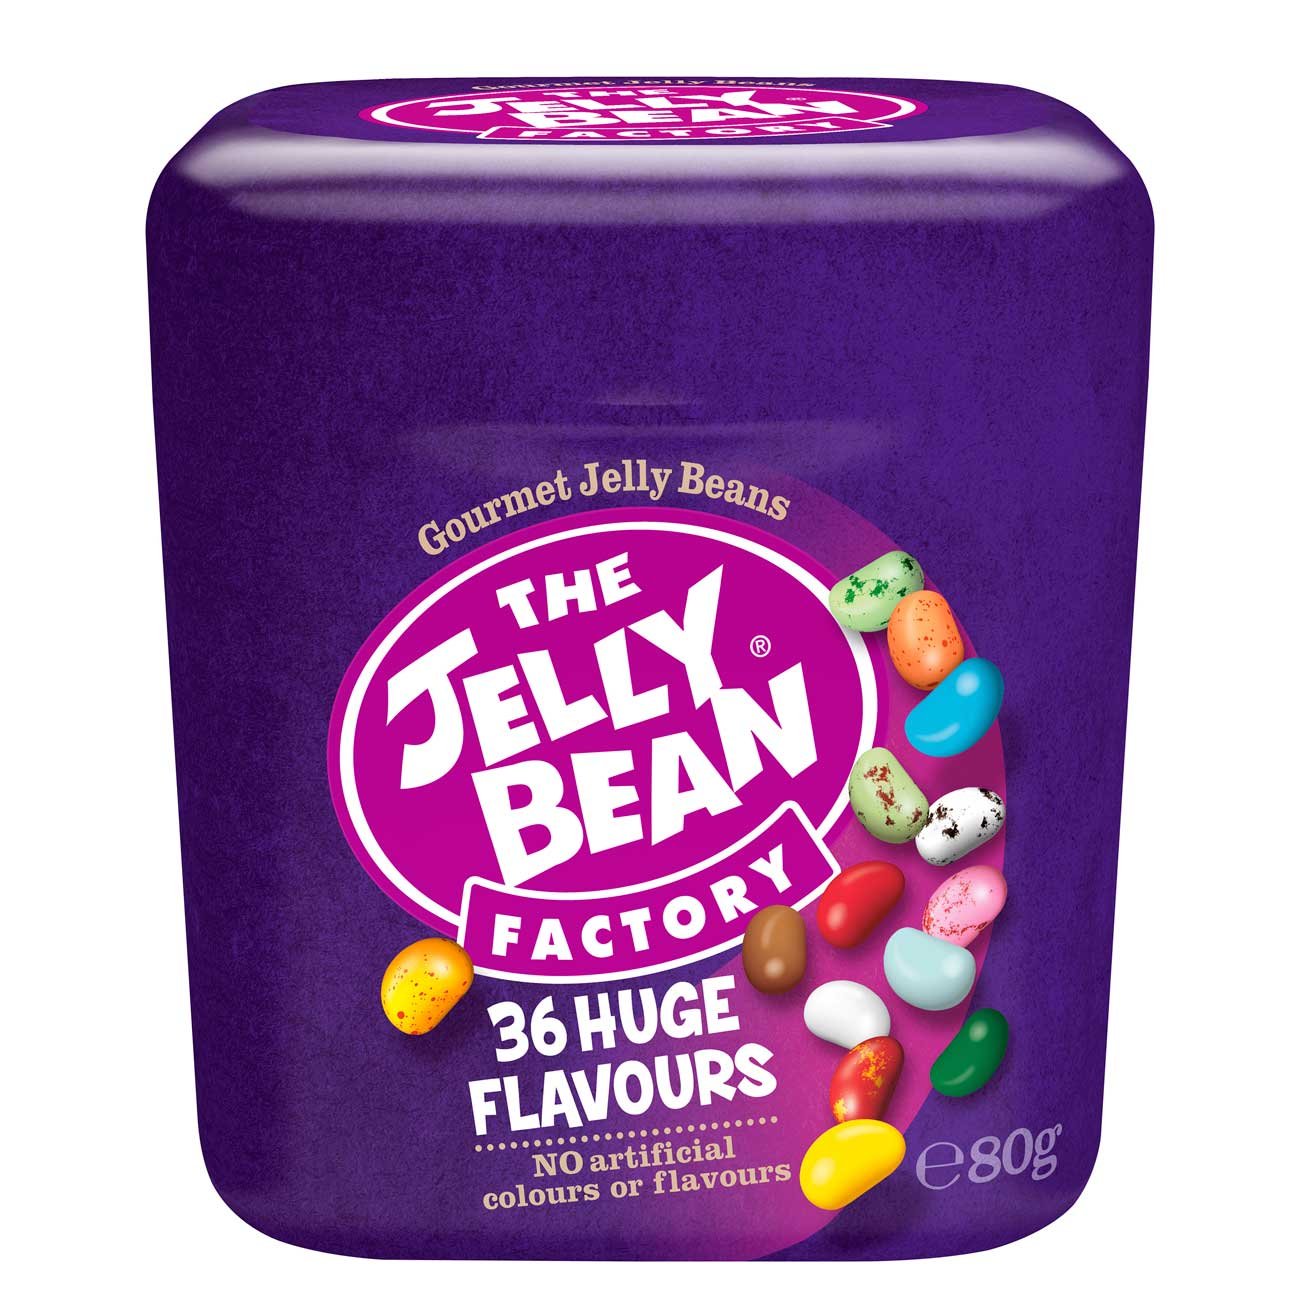 Jelly bean onlyfans. The Jelly Bean Factory 36 вкусов. Драже the Jelly Bean Factory 75гр.. The Jelly belly Factory. The Jelly Bean Factory вкусы.